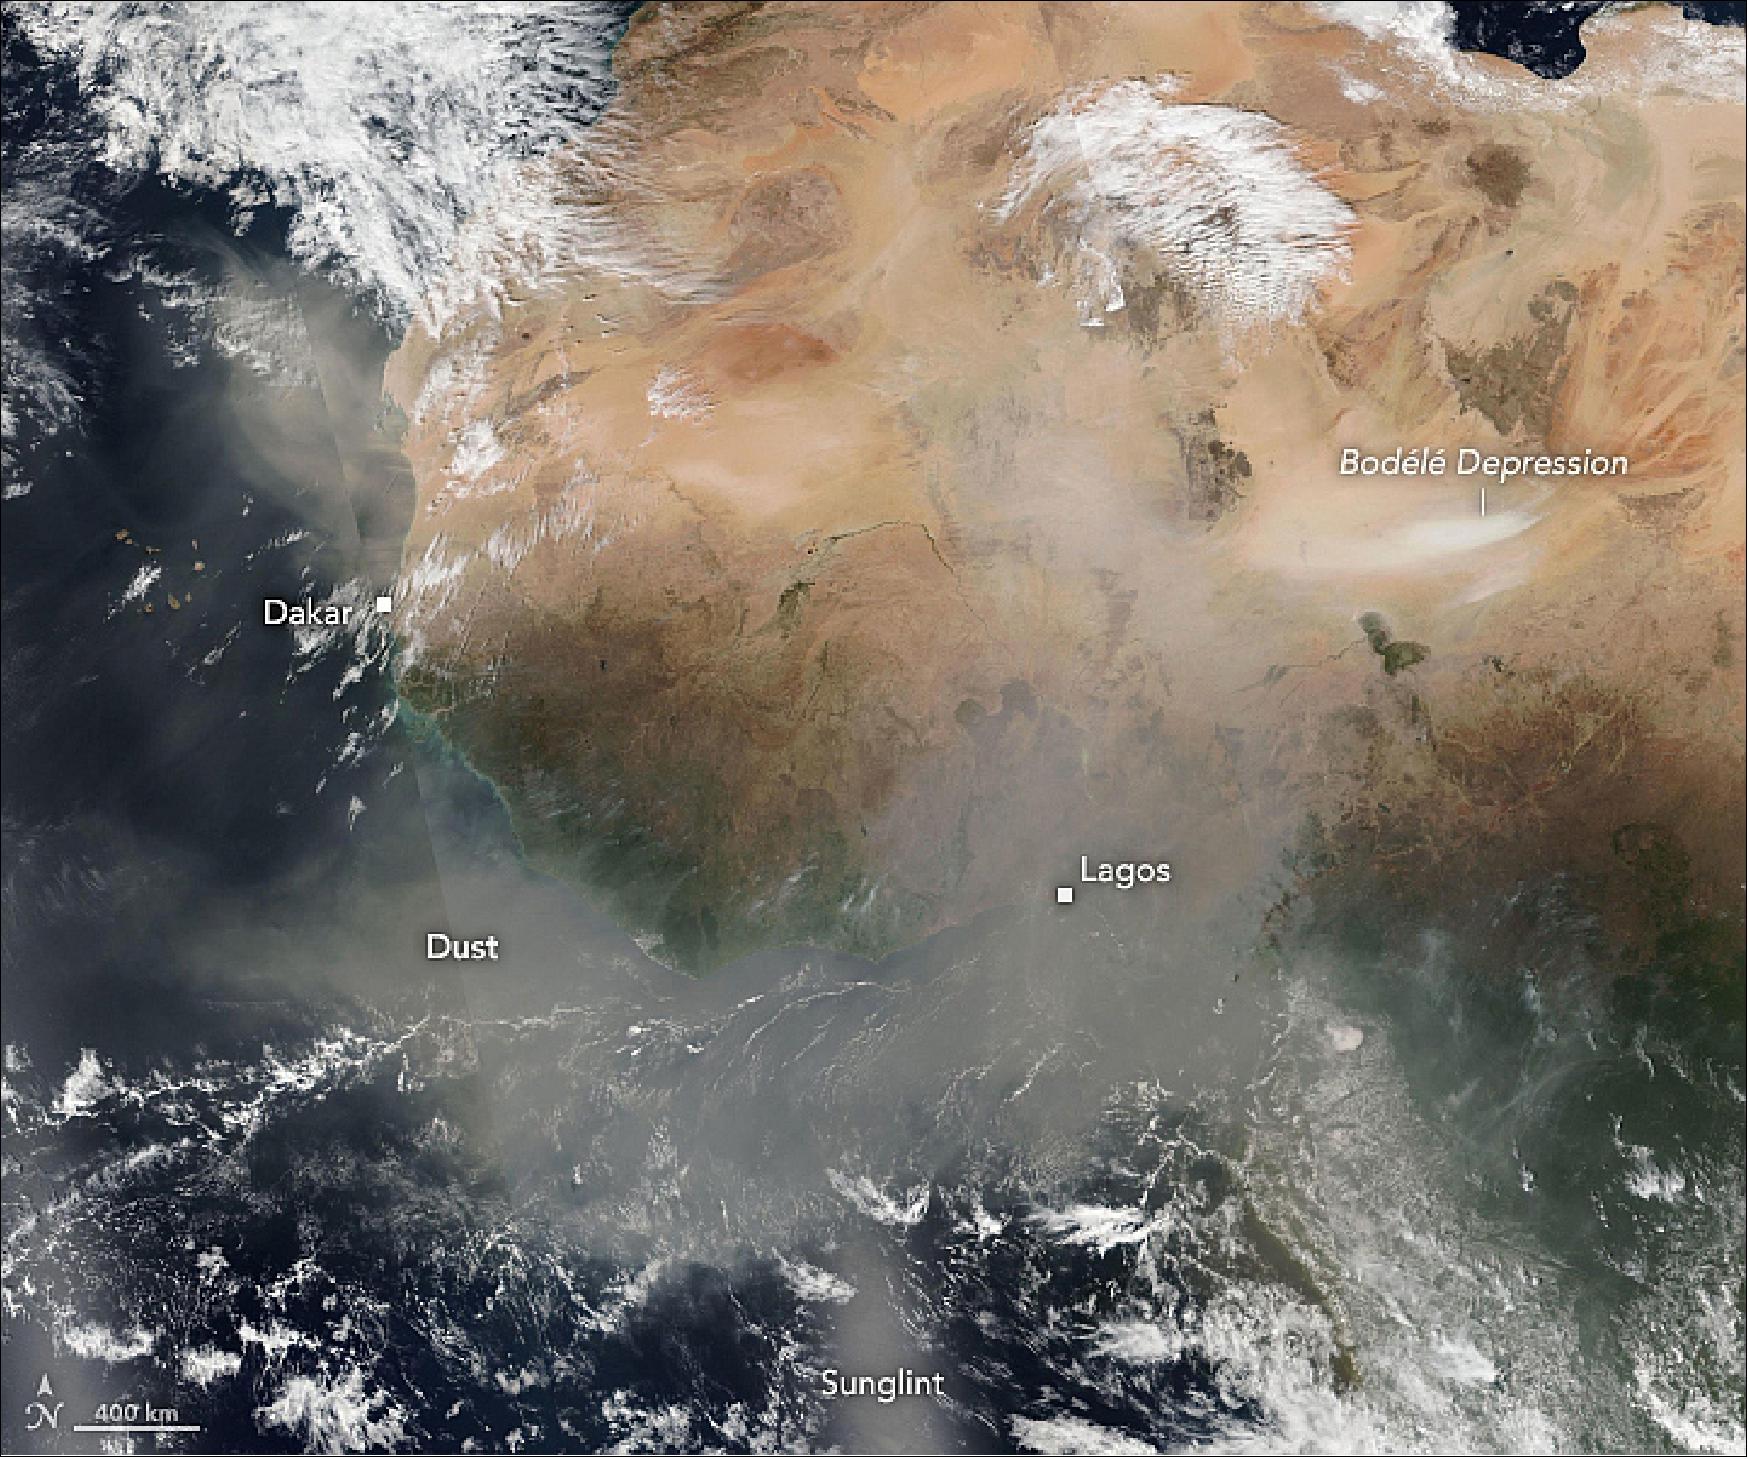 Figure 51: The VIIRS instrument on the Suomi NPP satellite acquired this image of dust spreading across West Africa on February 2, 2019. One of the largest sources of dust in the Sahara is the Bodélé Depression, a dried lake-bed in northern Chad that is rich with silt and fine-grained dust. The alignment of nearby mountain ranges functions like a wind tunnel, funneling strong winds over the depression on a regular basis (image credit: NASA Earth Observatory, image by Lauren Dauphin, using VIIRS data from the Suomi NPP. Story by Adam Voiland)